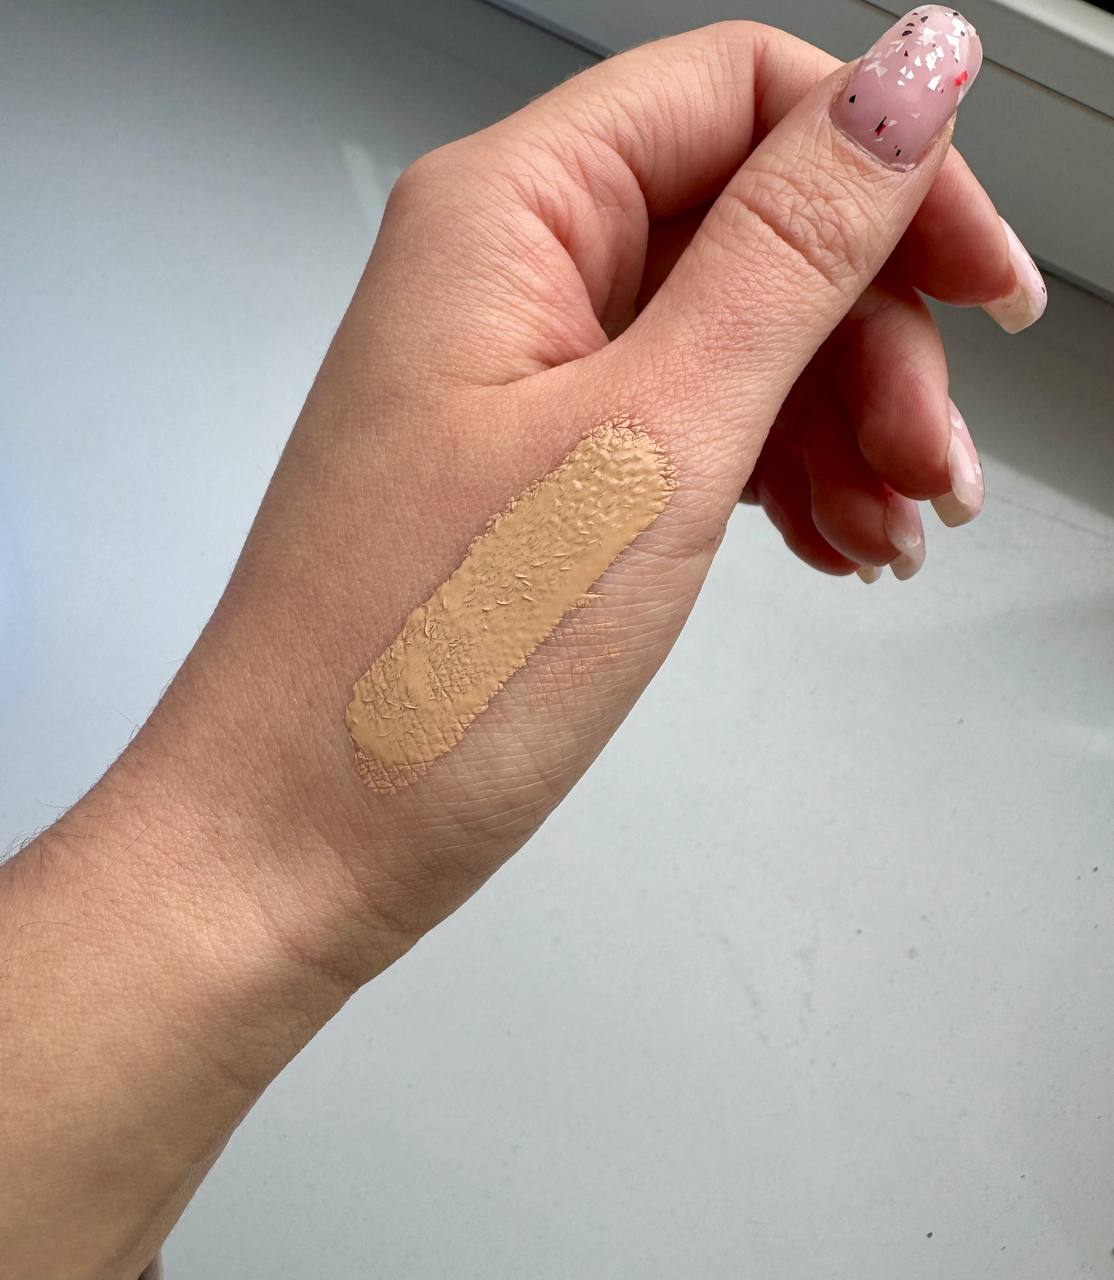 Estee Lauder Double Wear Stay-in-Place Makeup SPF10